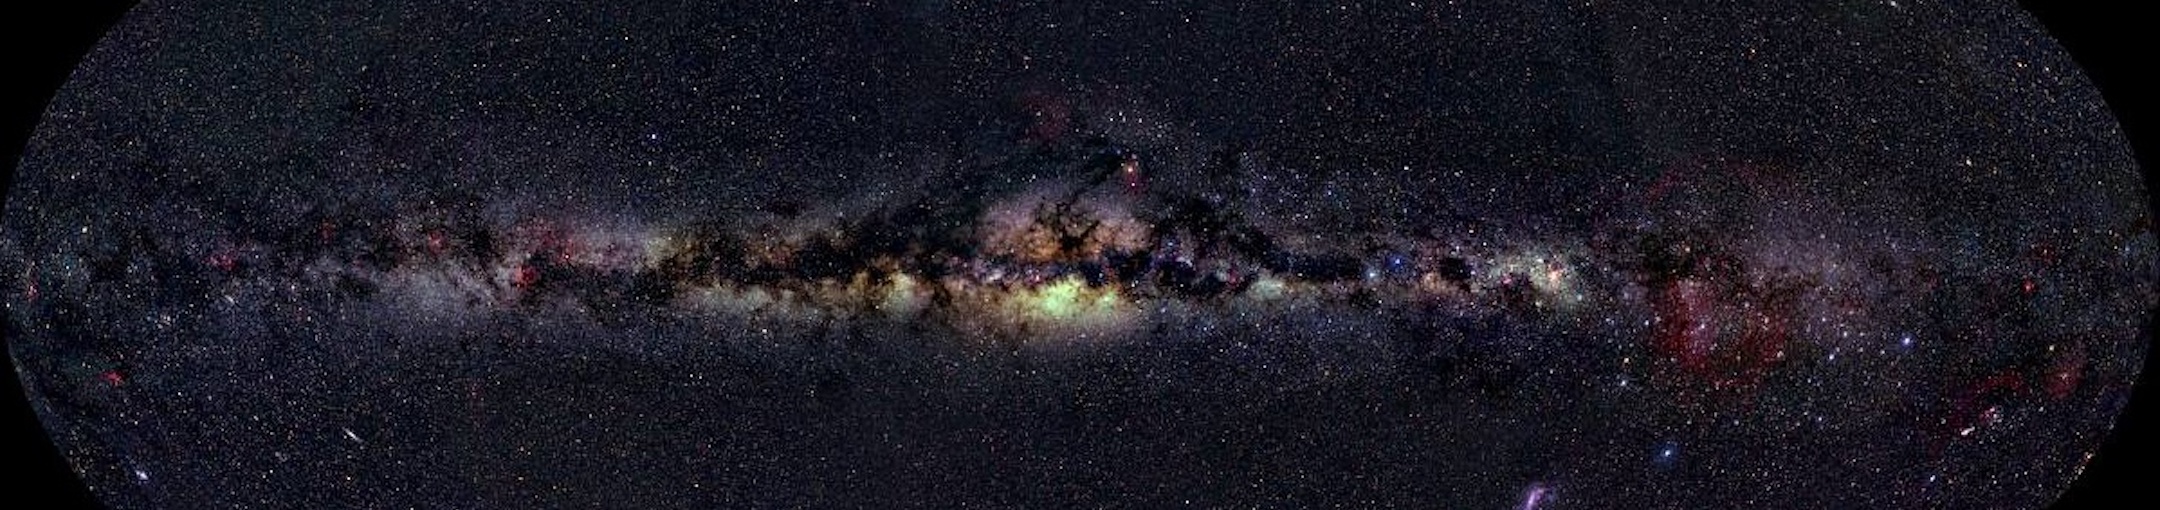 The plane of the Milky Way